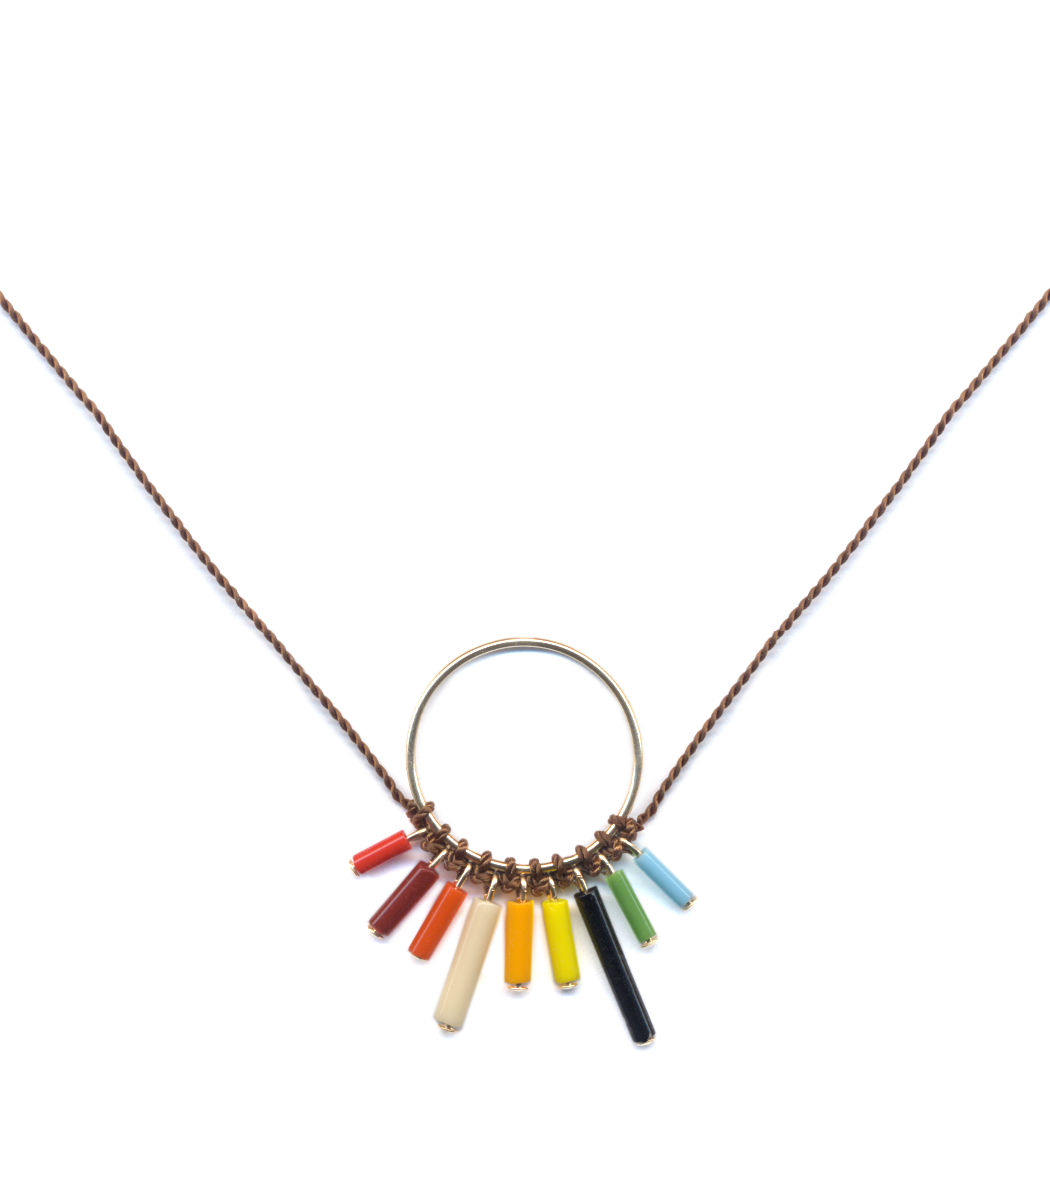 N2111 (Refraction) Necklace